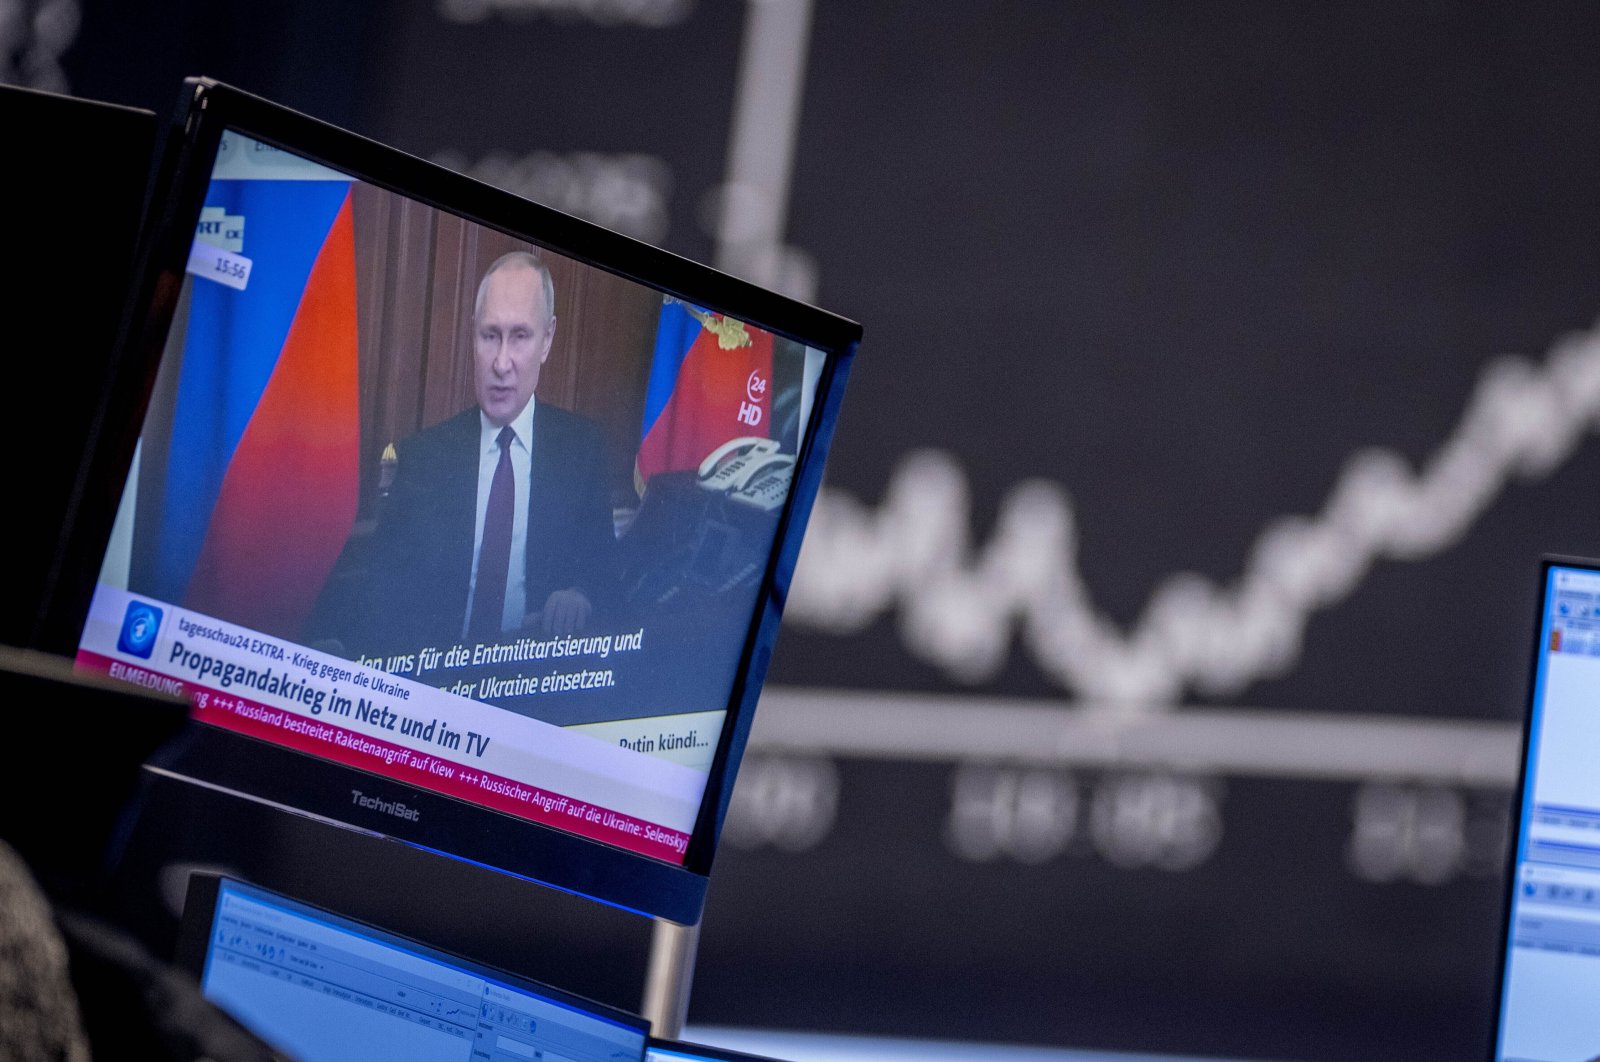 Russia&#039;s President Vladimir Putin appears on a television screen at the stock market in Frankfurt, Germany, Feb. 25, 2022. (AP Photo)